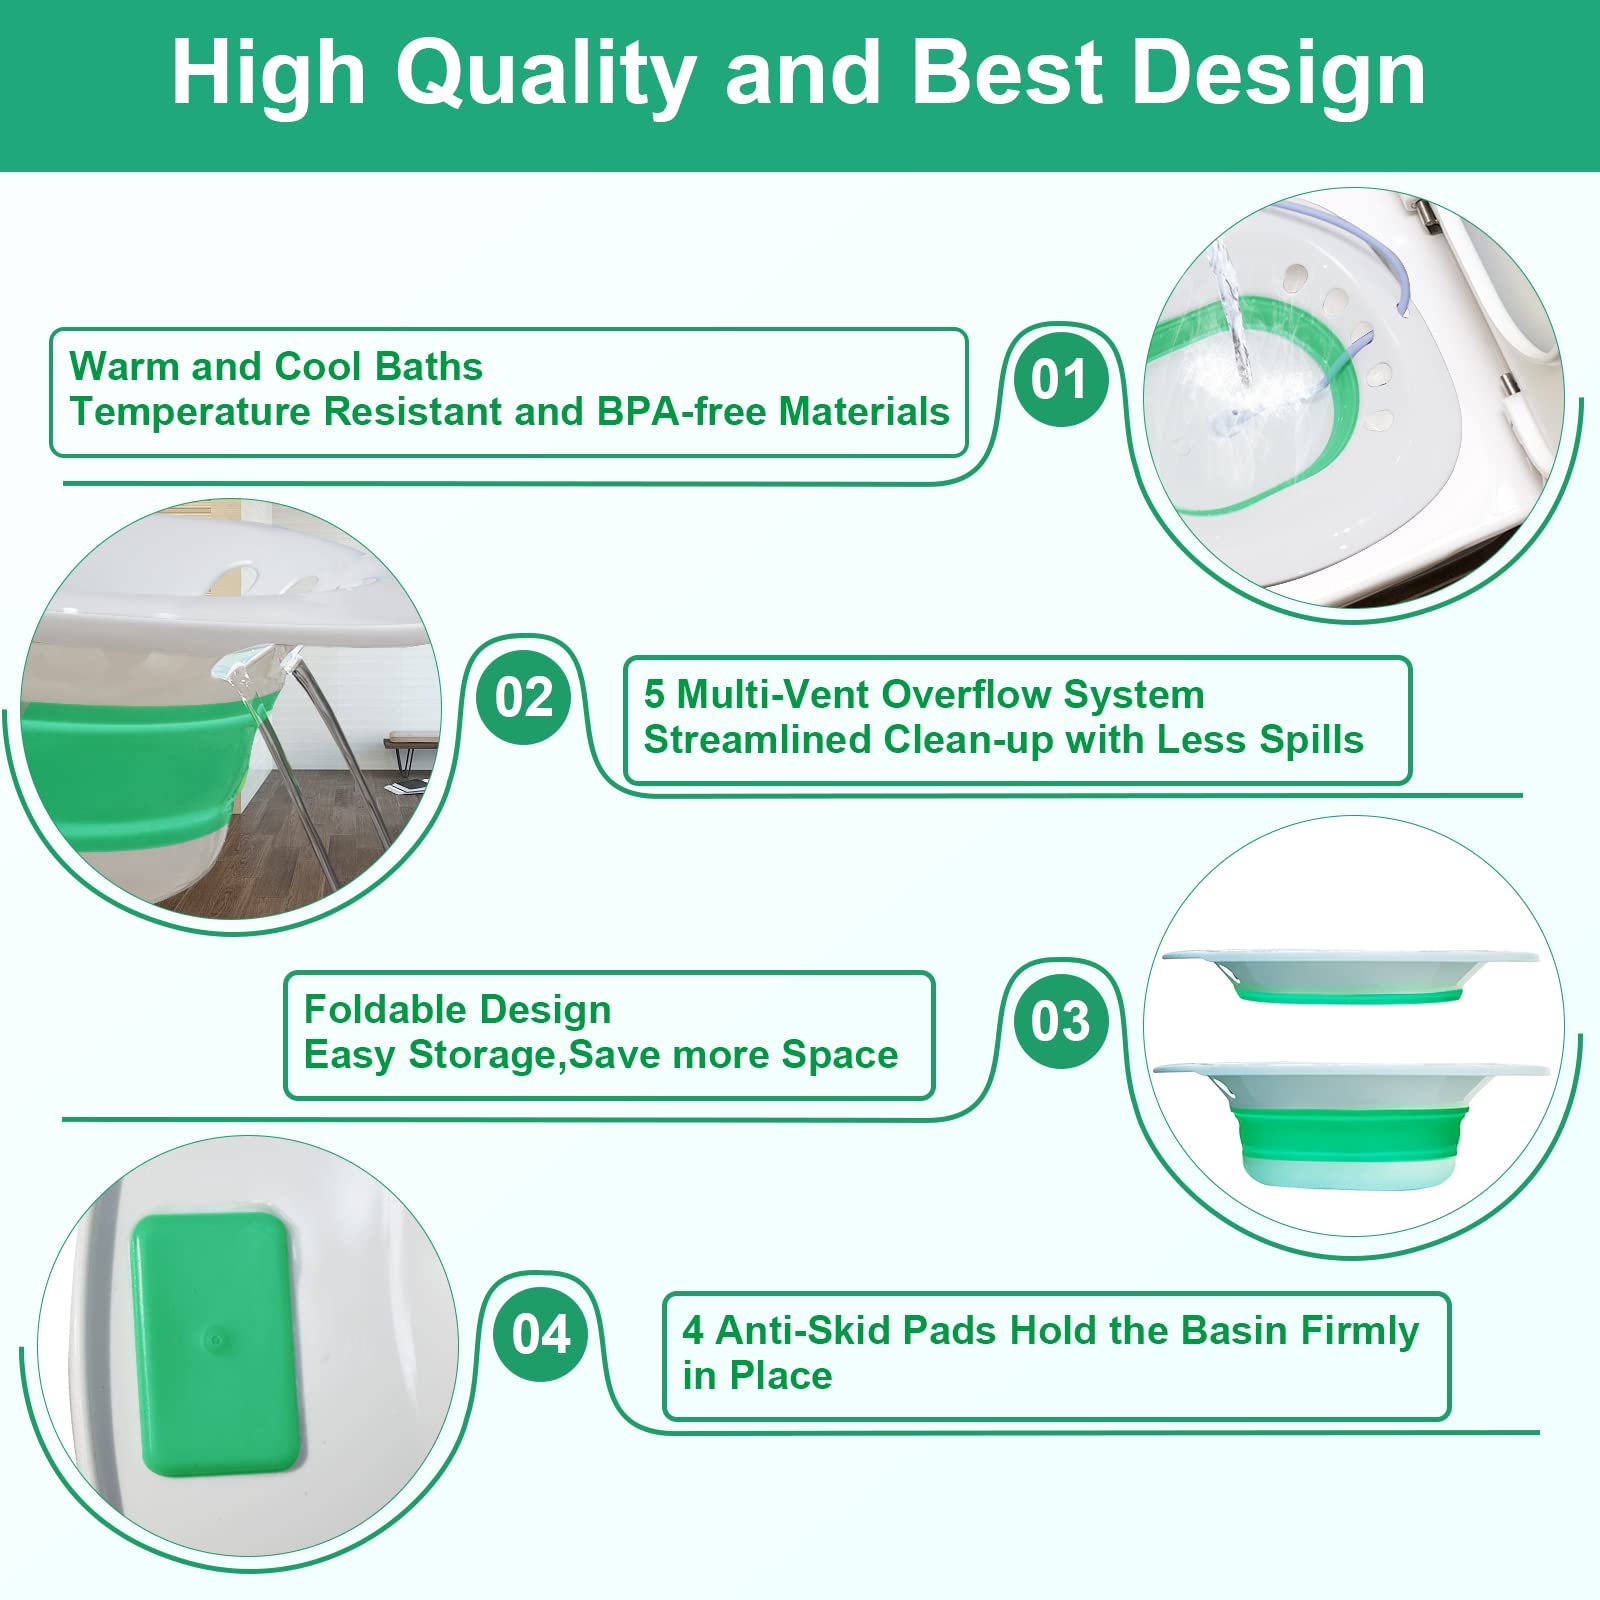 Sitz Bath for Hemorrhoids, Sitz Bath for Toilet Seat, Postpartum Care, Perineum Relief, Sits Bath Kit for Women,Collapsible Storage, Wide Seat,Easy to Store